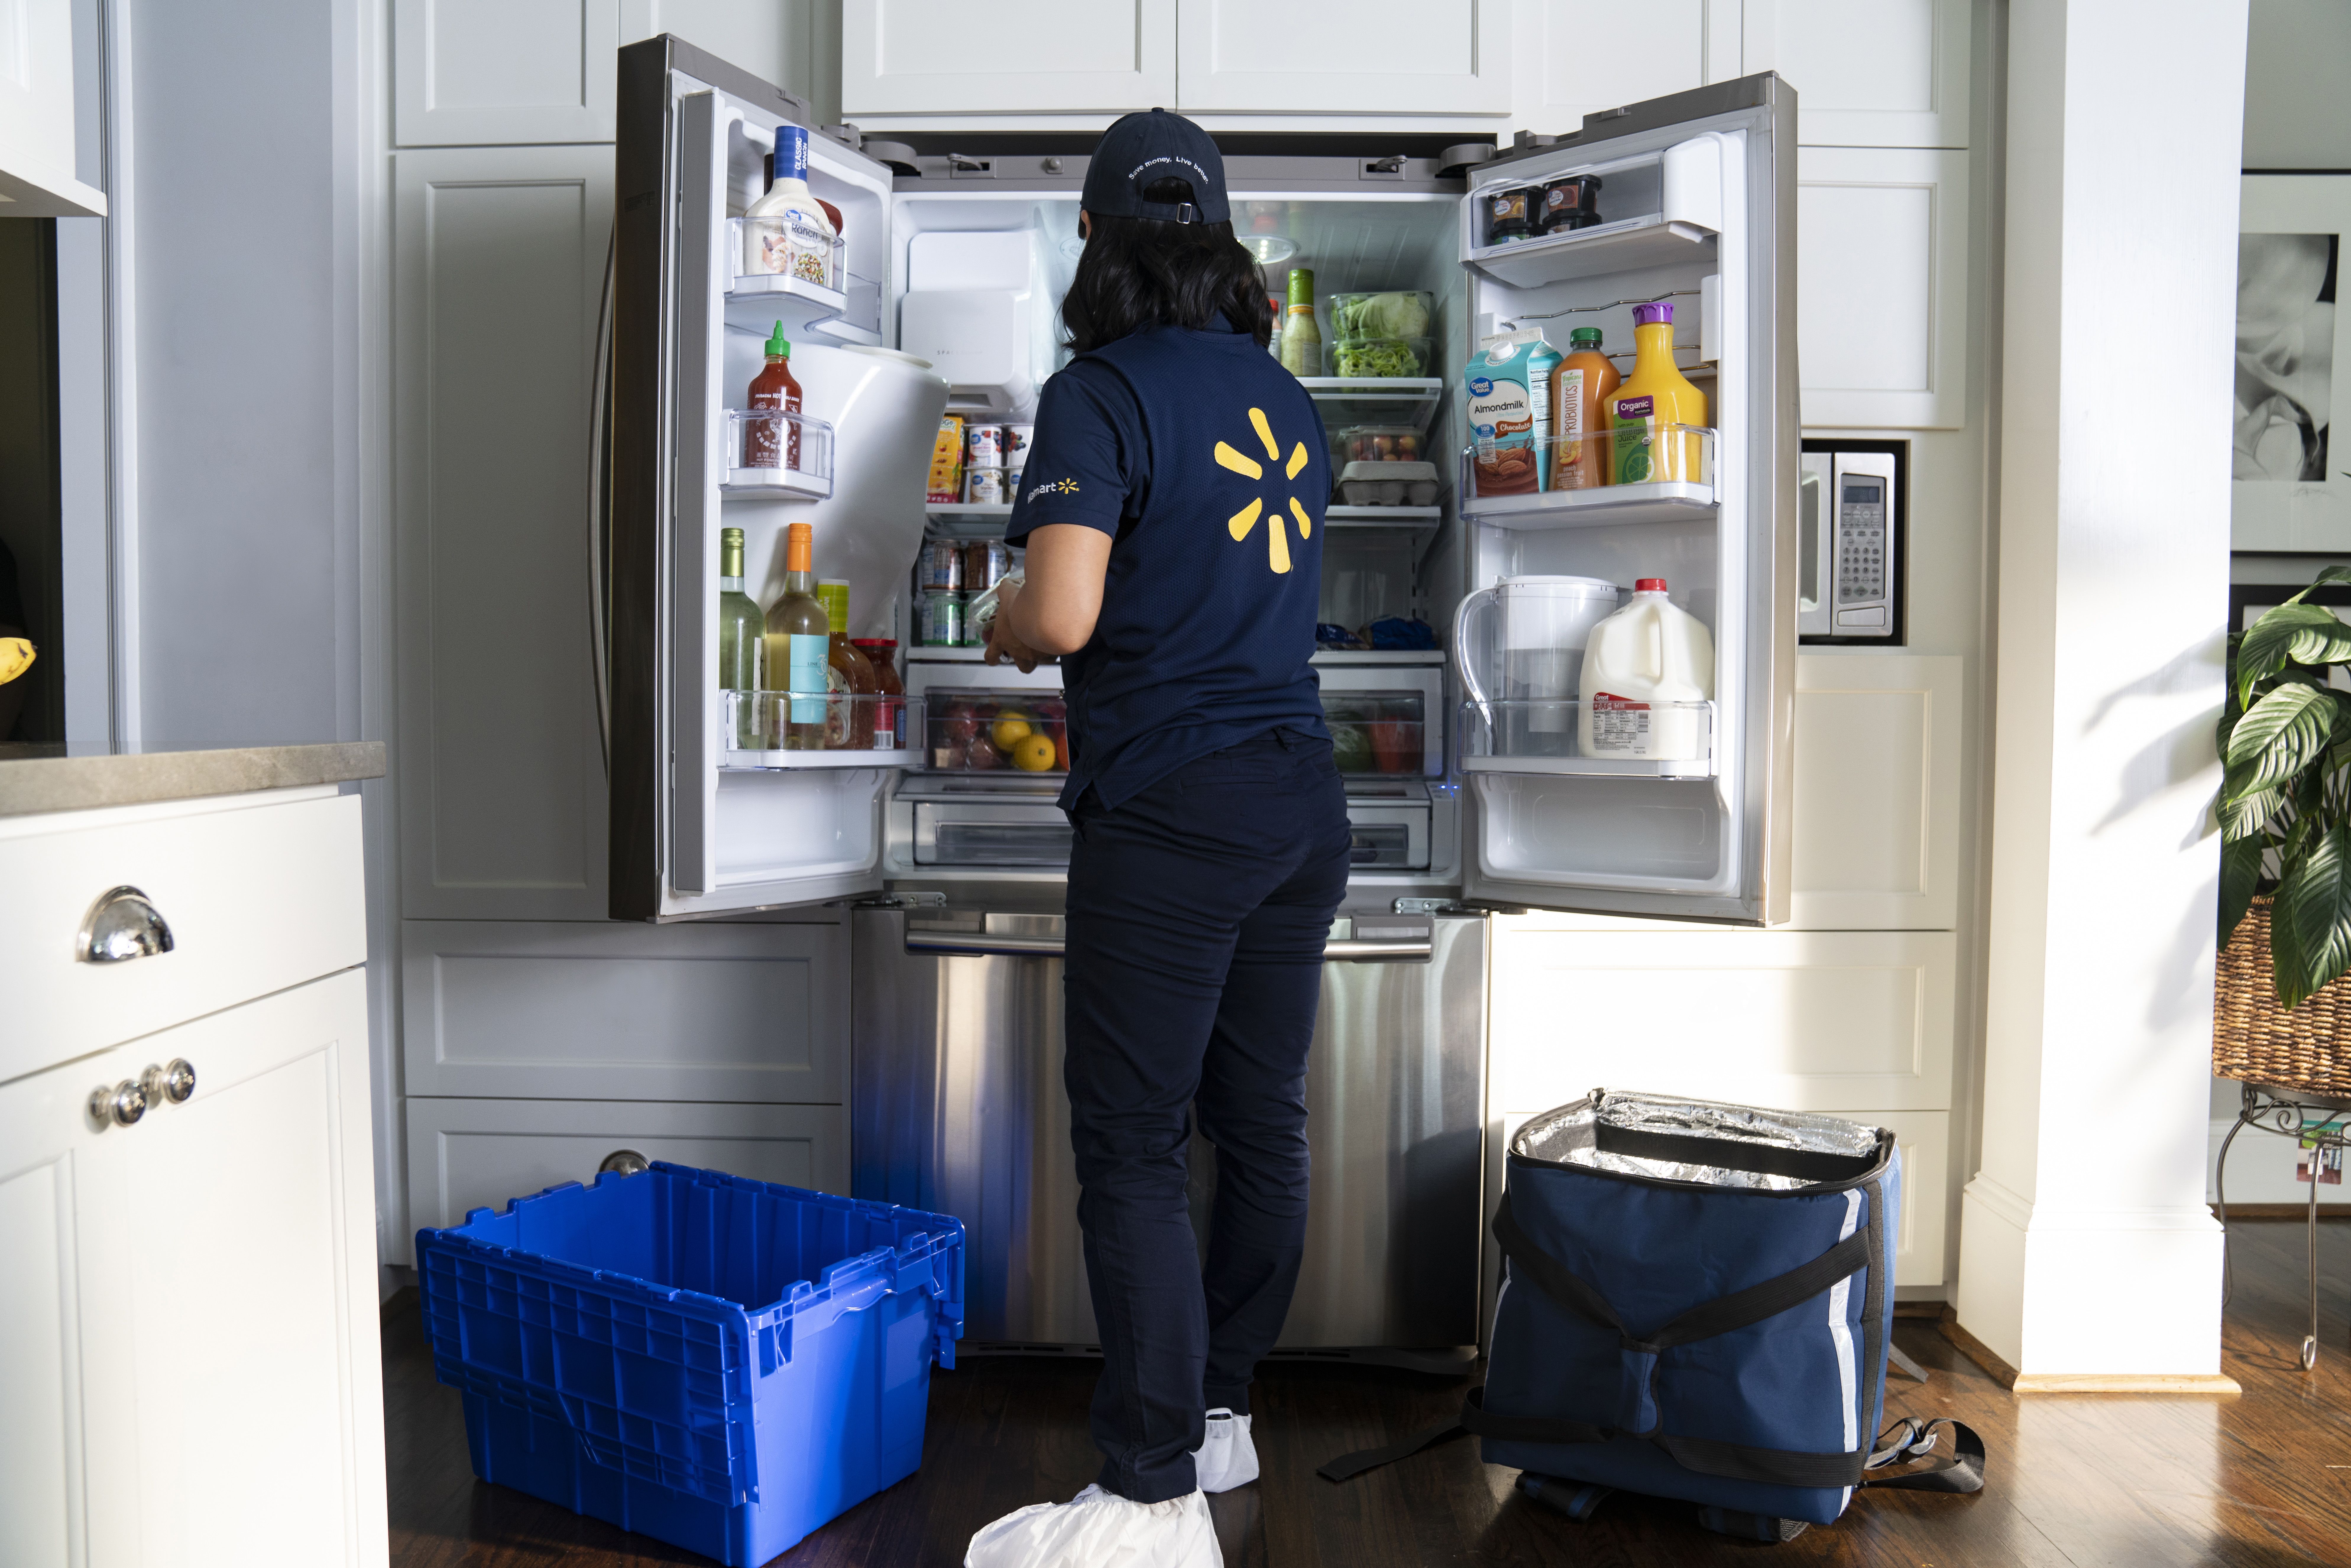 Walmart is going to start delivering groceries inside shoppers' homes